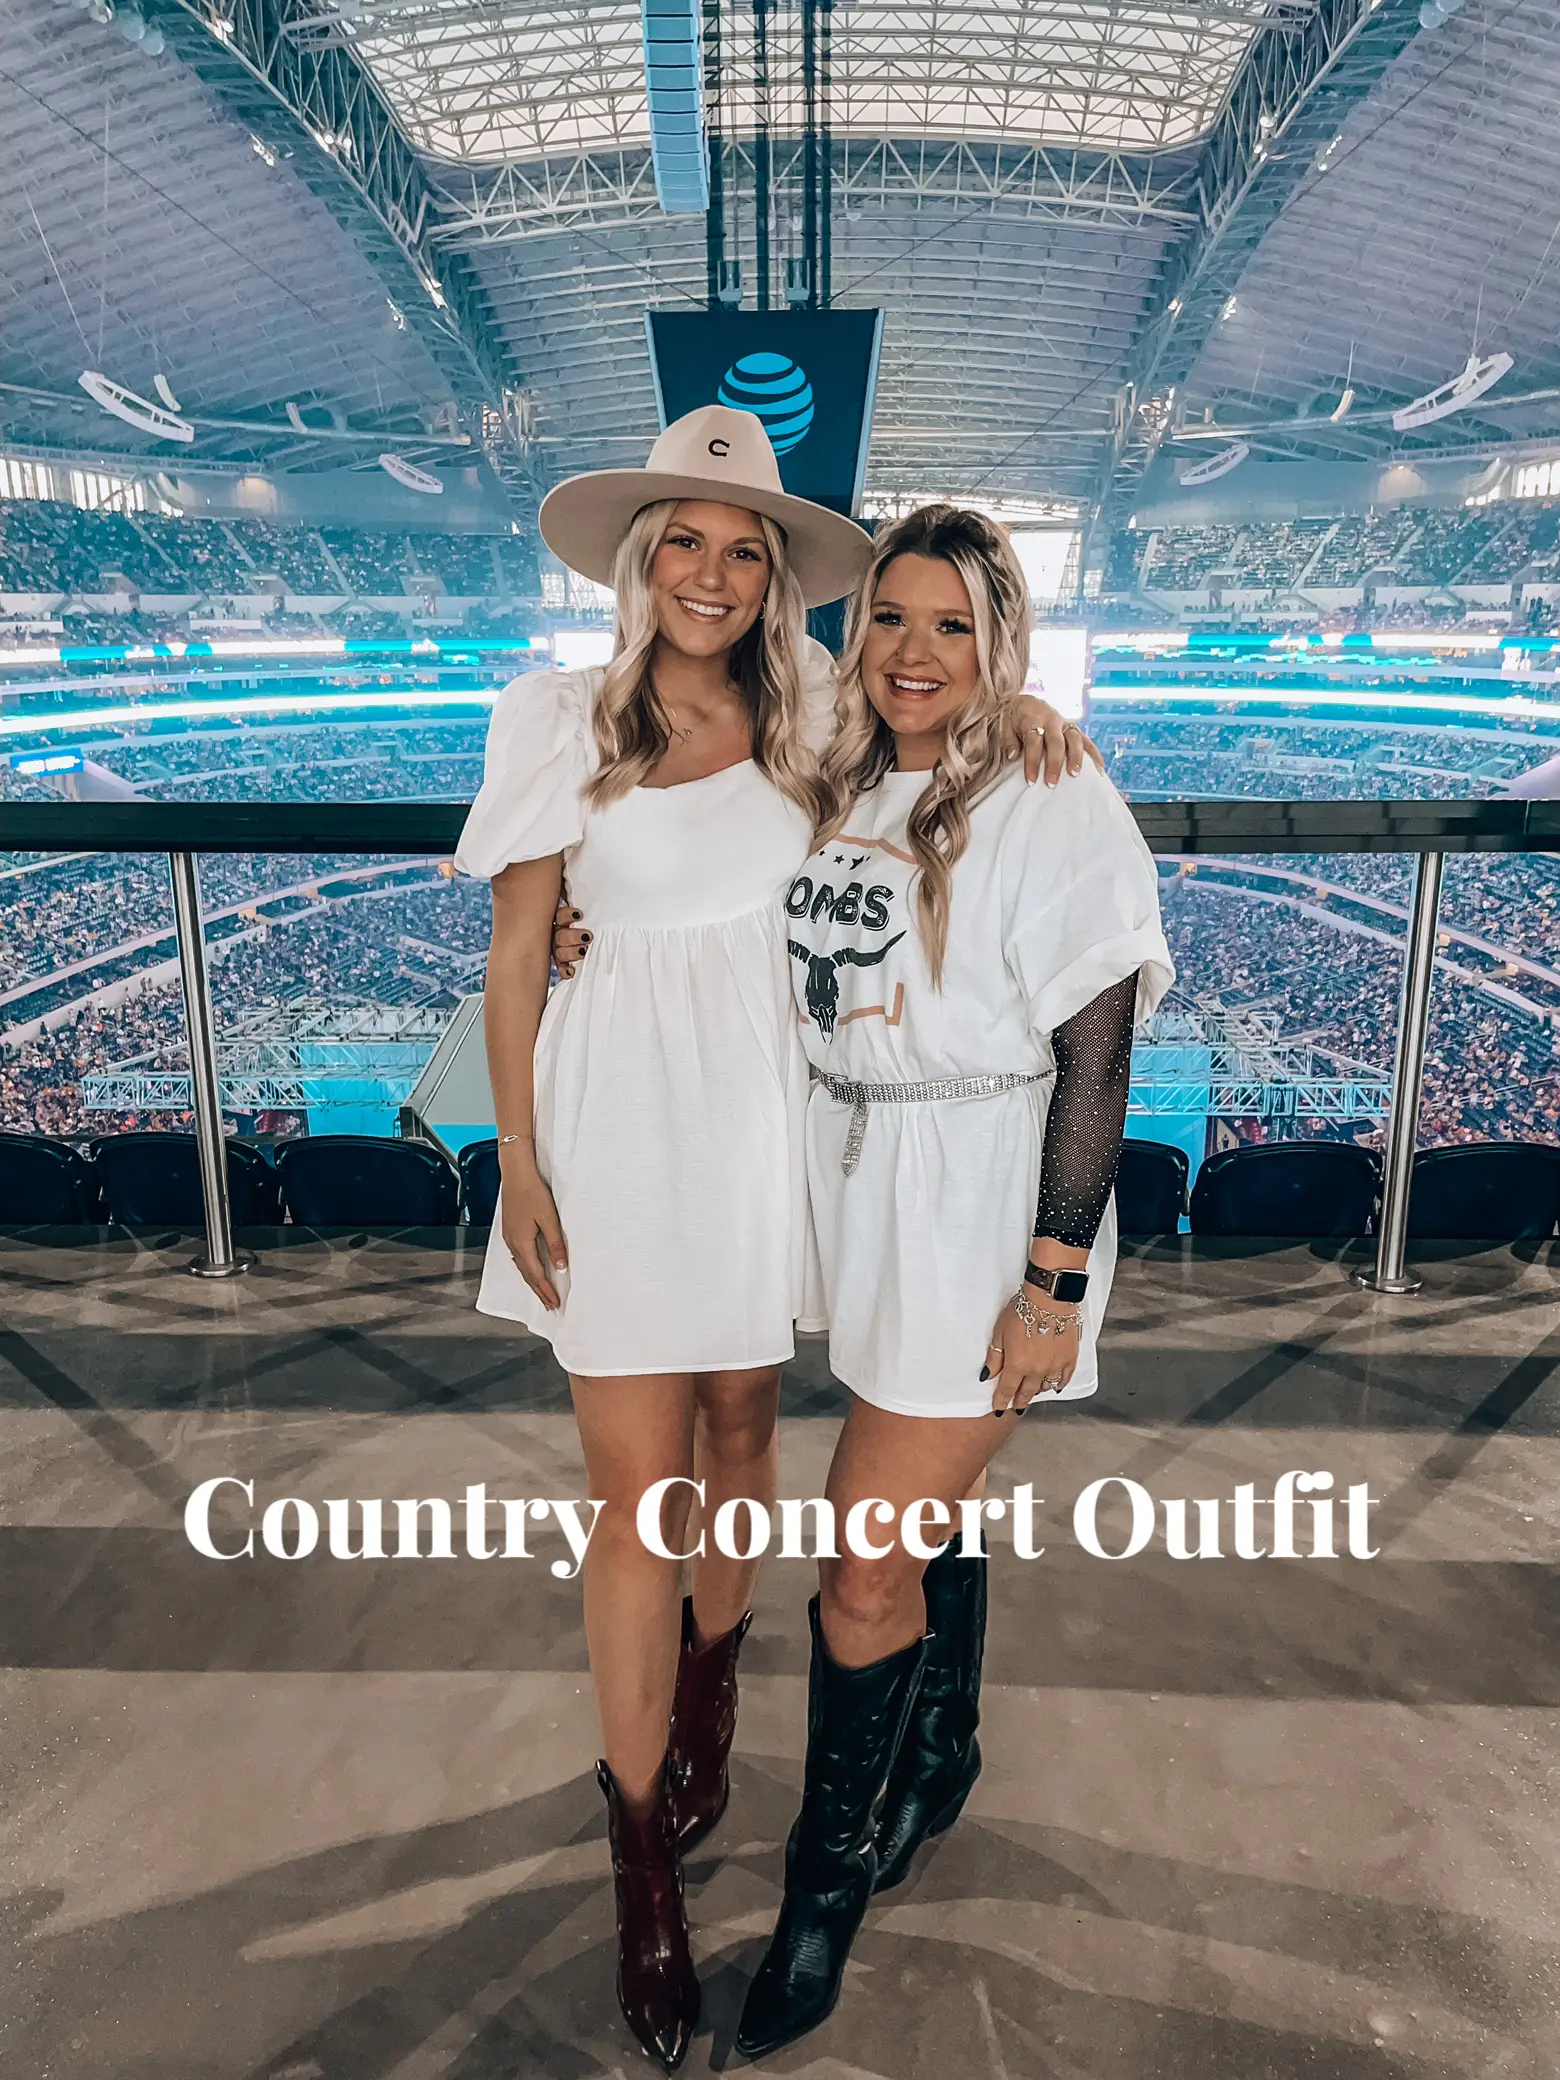 country concert outfit ideas for women